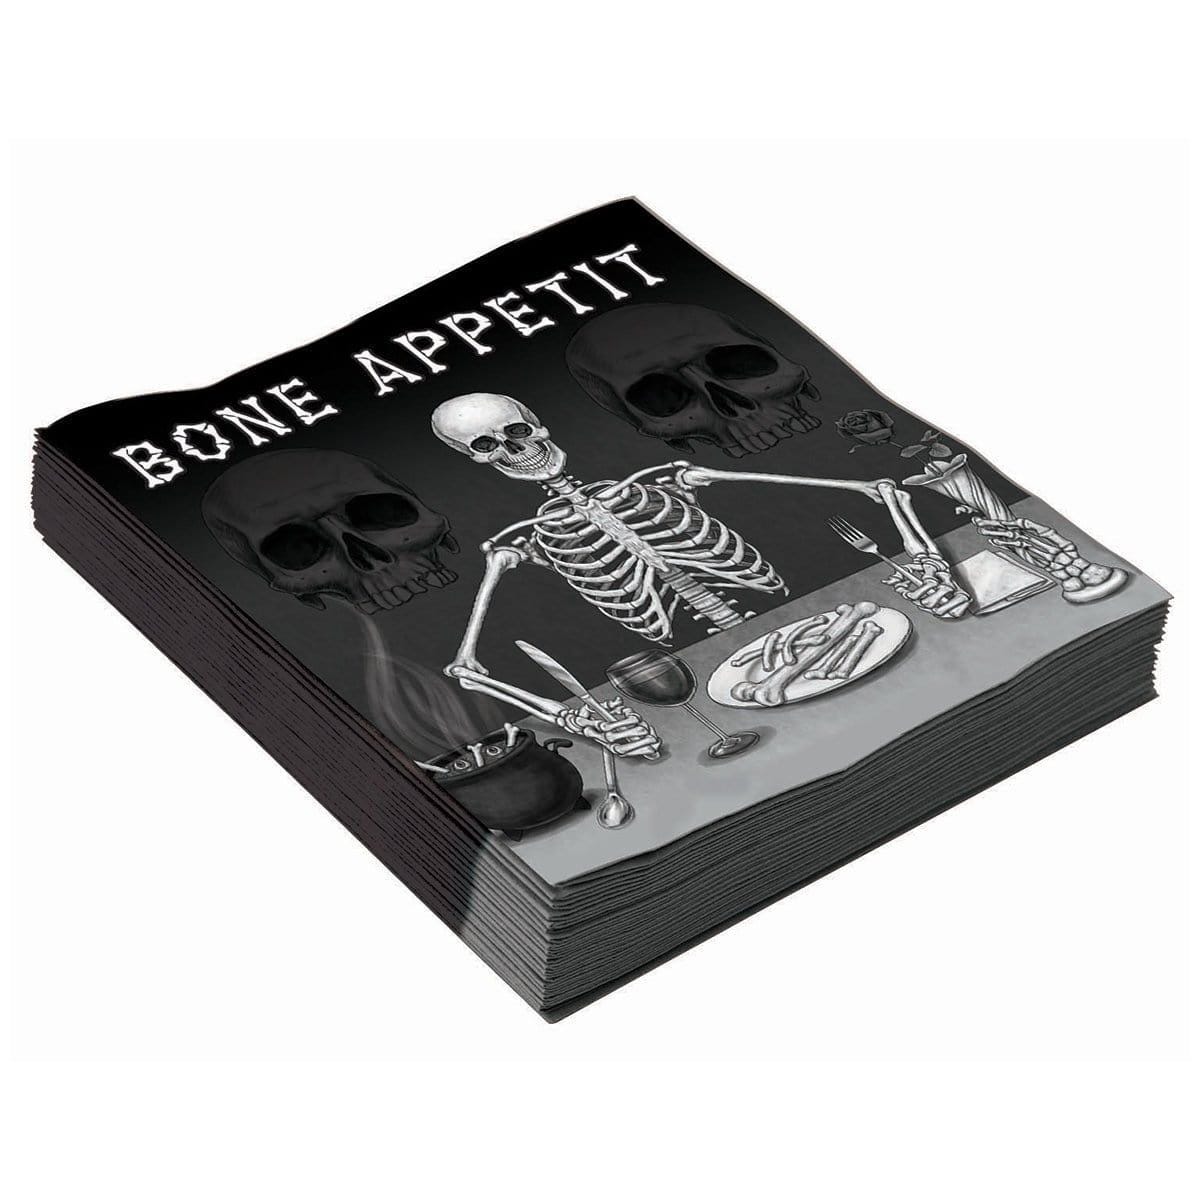 Buy Halloween Bone Appetit lunch napkins, 16 per package sold at Party Expert